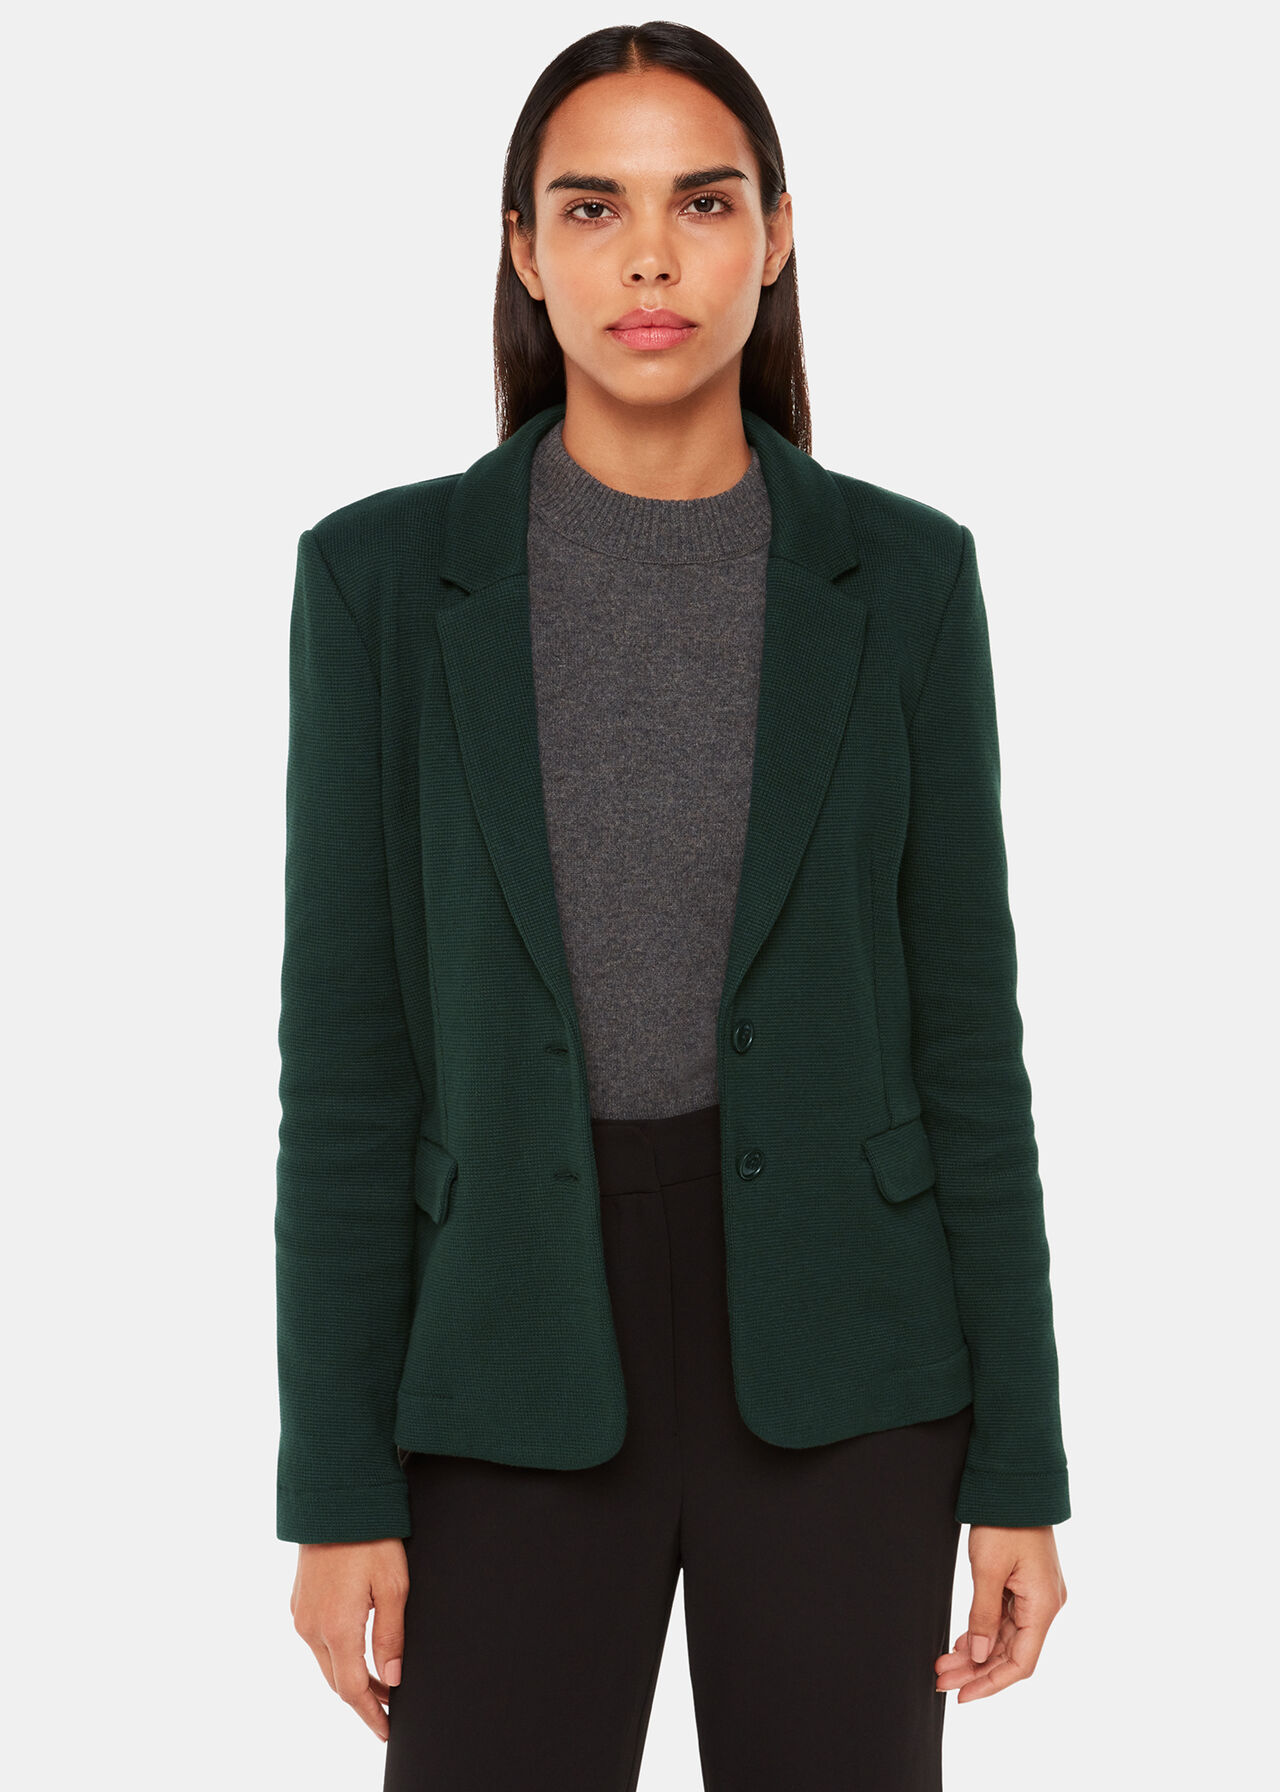 Dark Green Single Breasted Slim Fit Jersey Jacket, Whistles